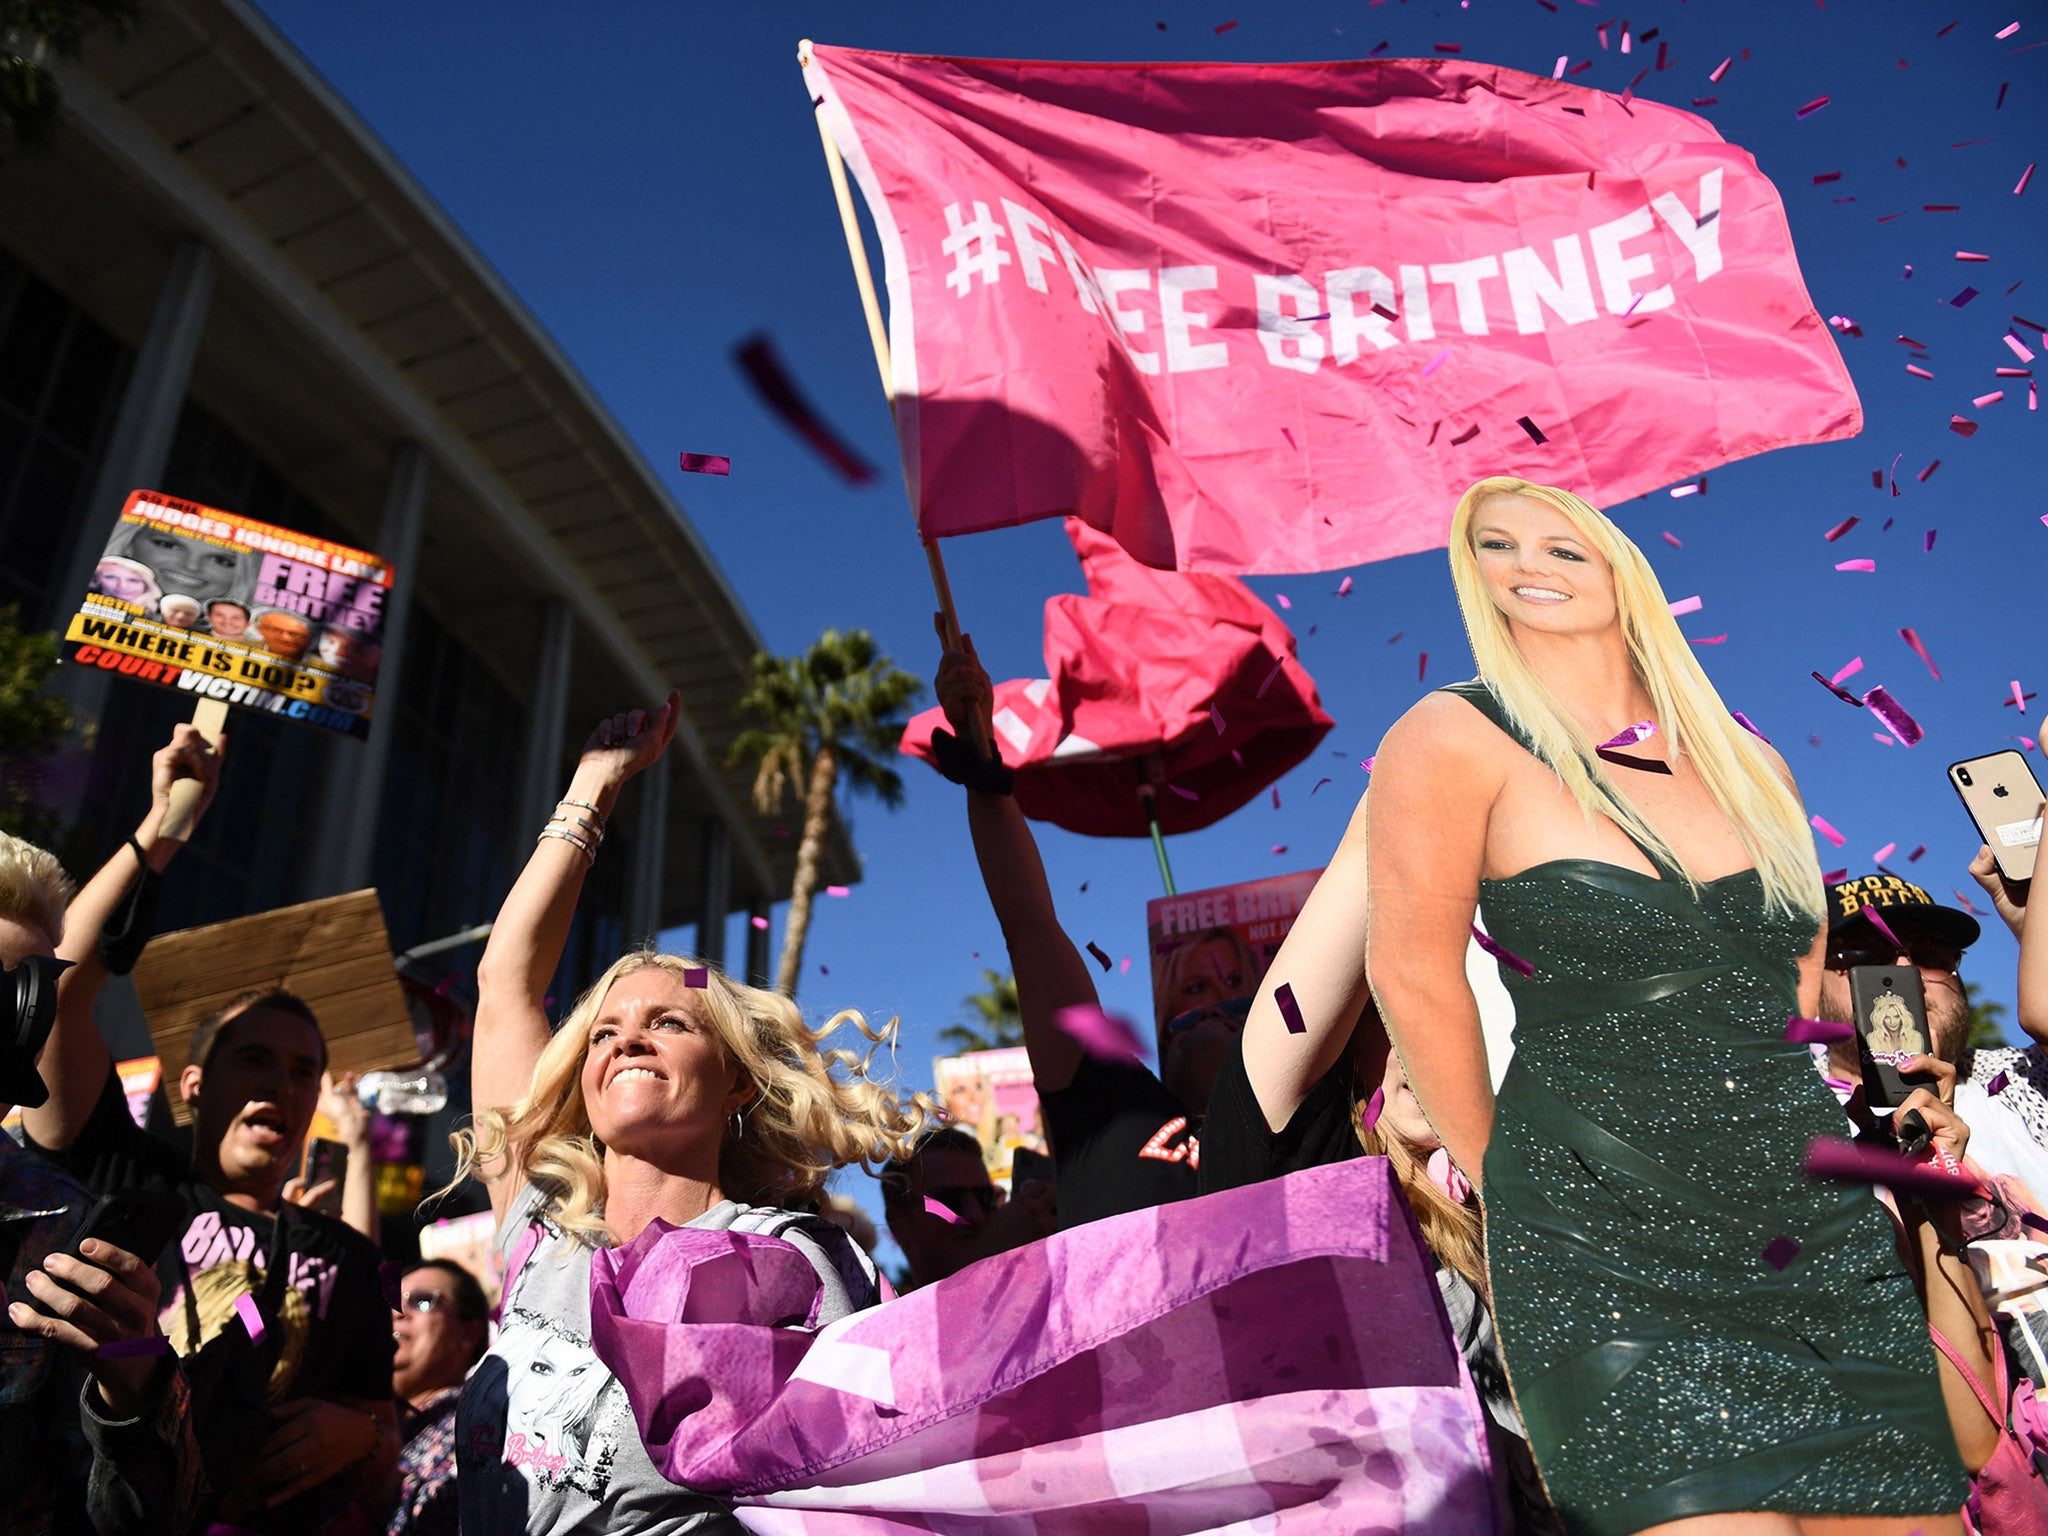 Supporters of the #FreeBritney movement gather outside her Los Angeles conservatorship hearing in November